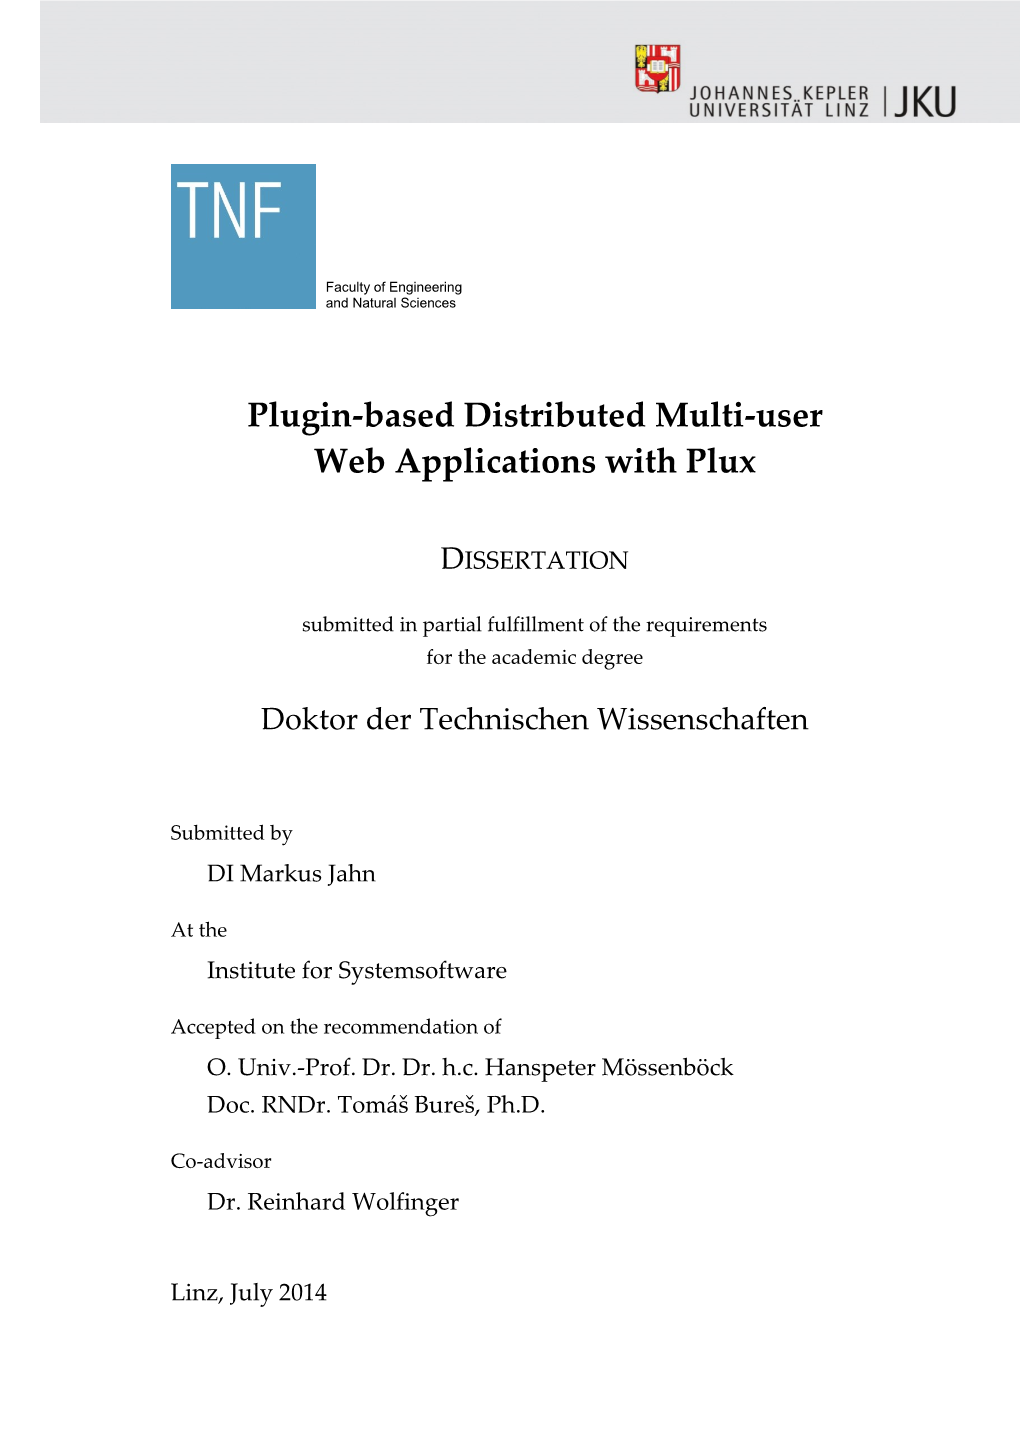 Plugin-Based Distributed Multi-User Web Applications with Plux